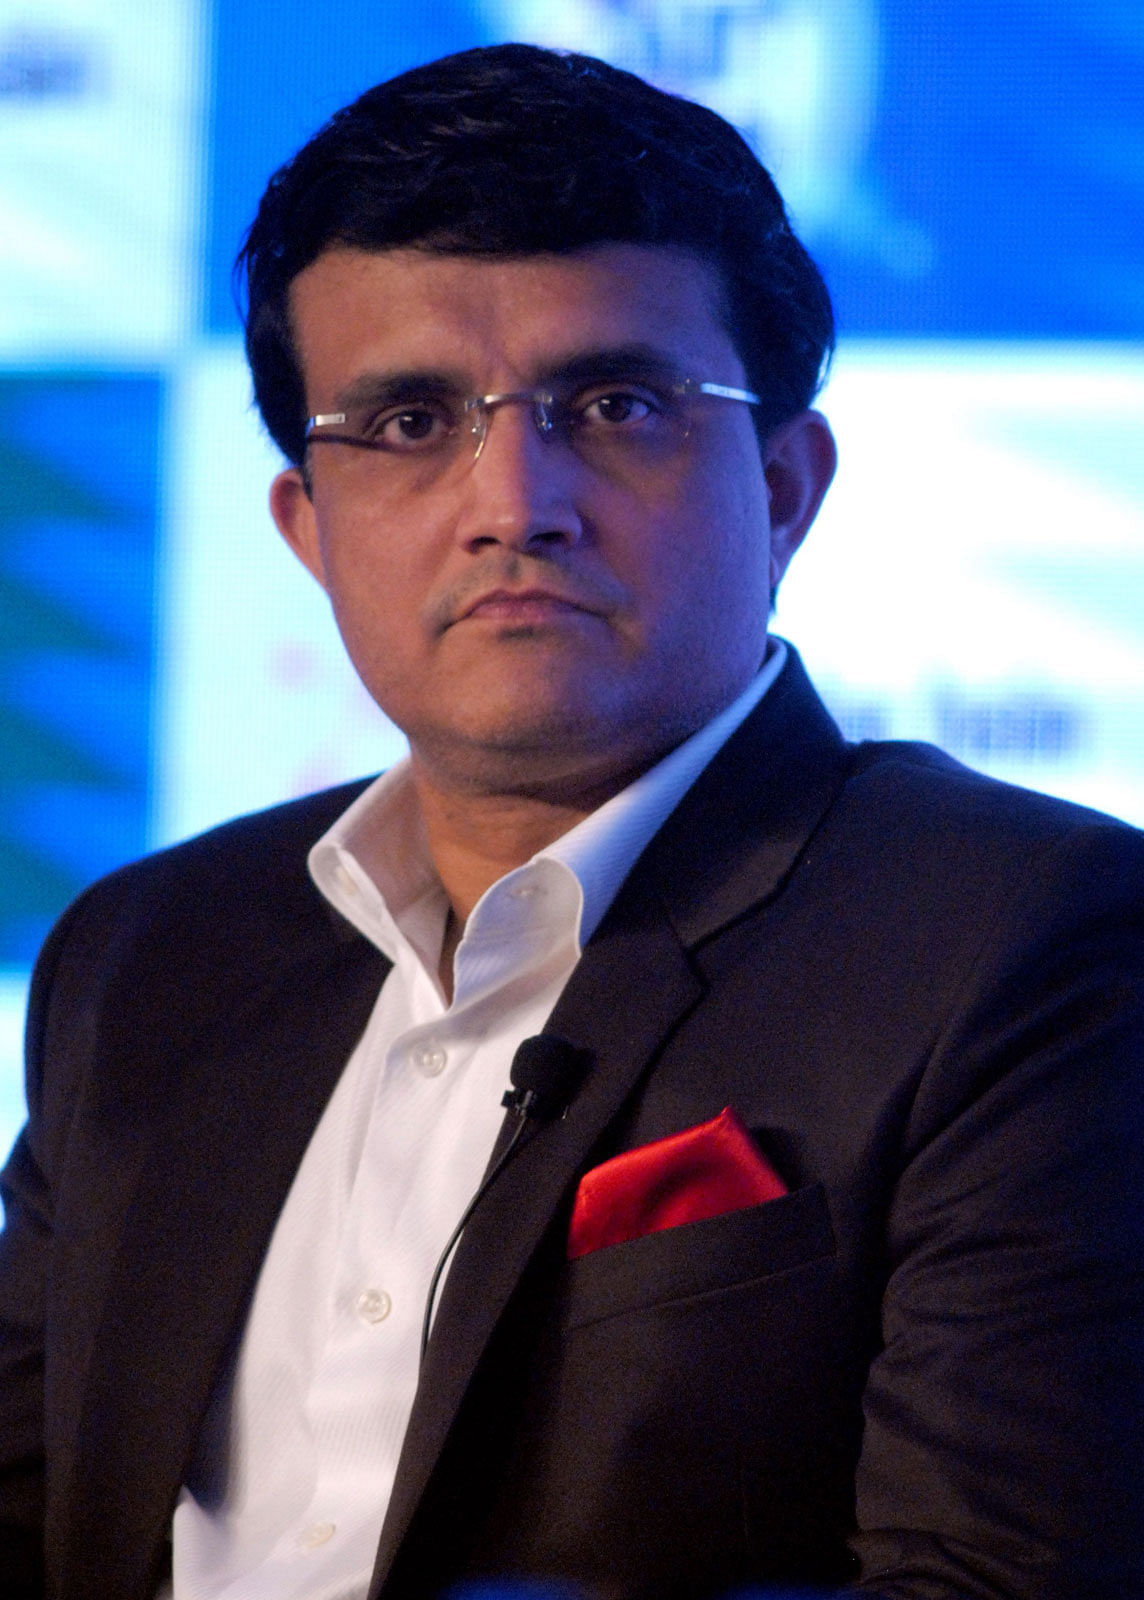 In this file photo taken on November 30, 2017 former Indian cricketer Sourav Ganguly attends a panel discussion for an advertisment campaign launch in Mumbai. Former captain Sourav Ganguly has expressed his `deep sense of fear` at India`s cricket administration as he slammed the sloppy handling of #MeToo allegations against board chief executive Rahul Johri among other key issues. AFP